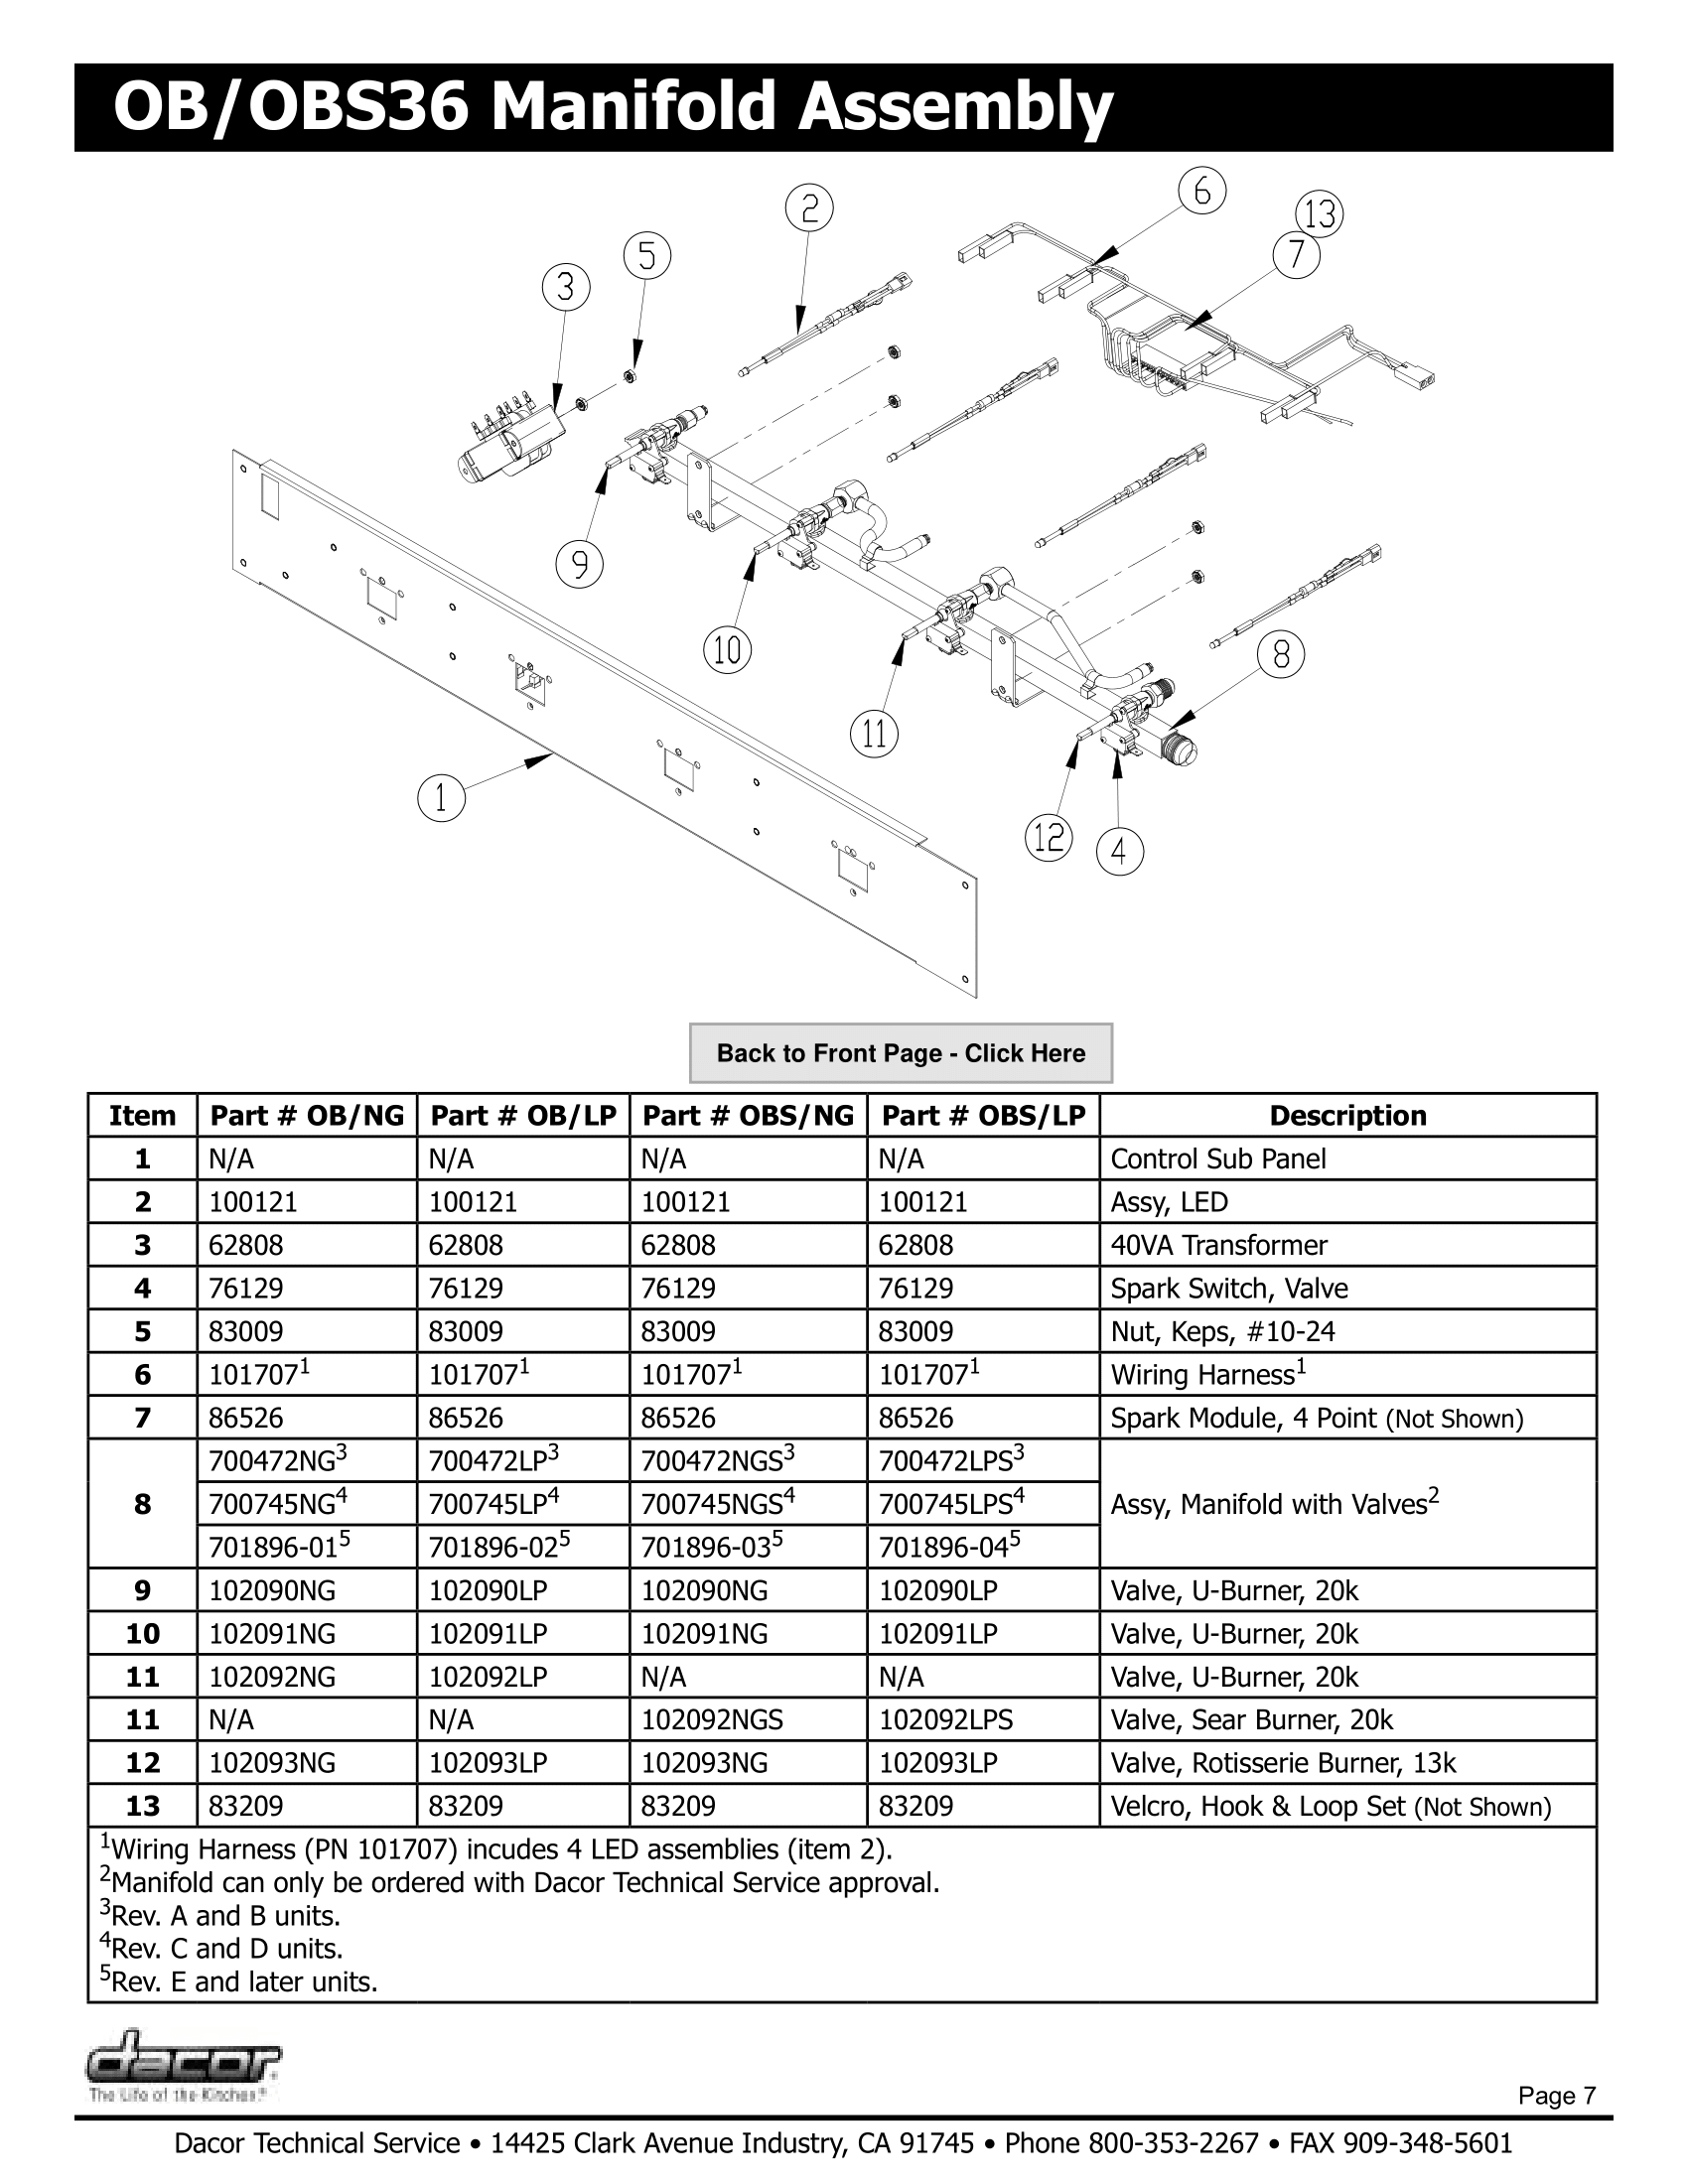 Dacor OBS36 Manifold Assembly Schematic